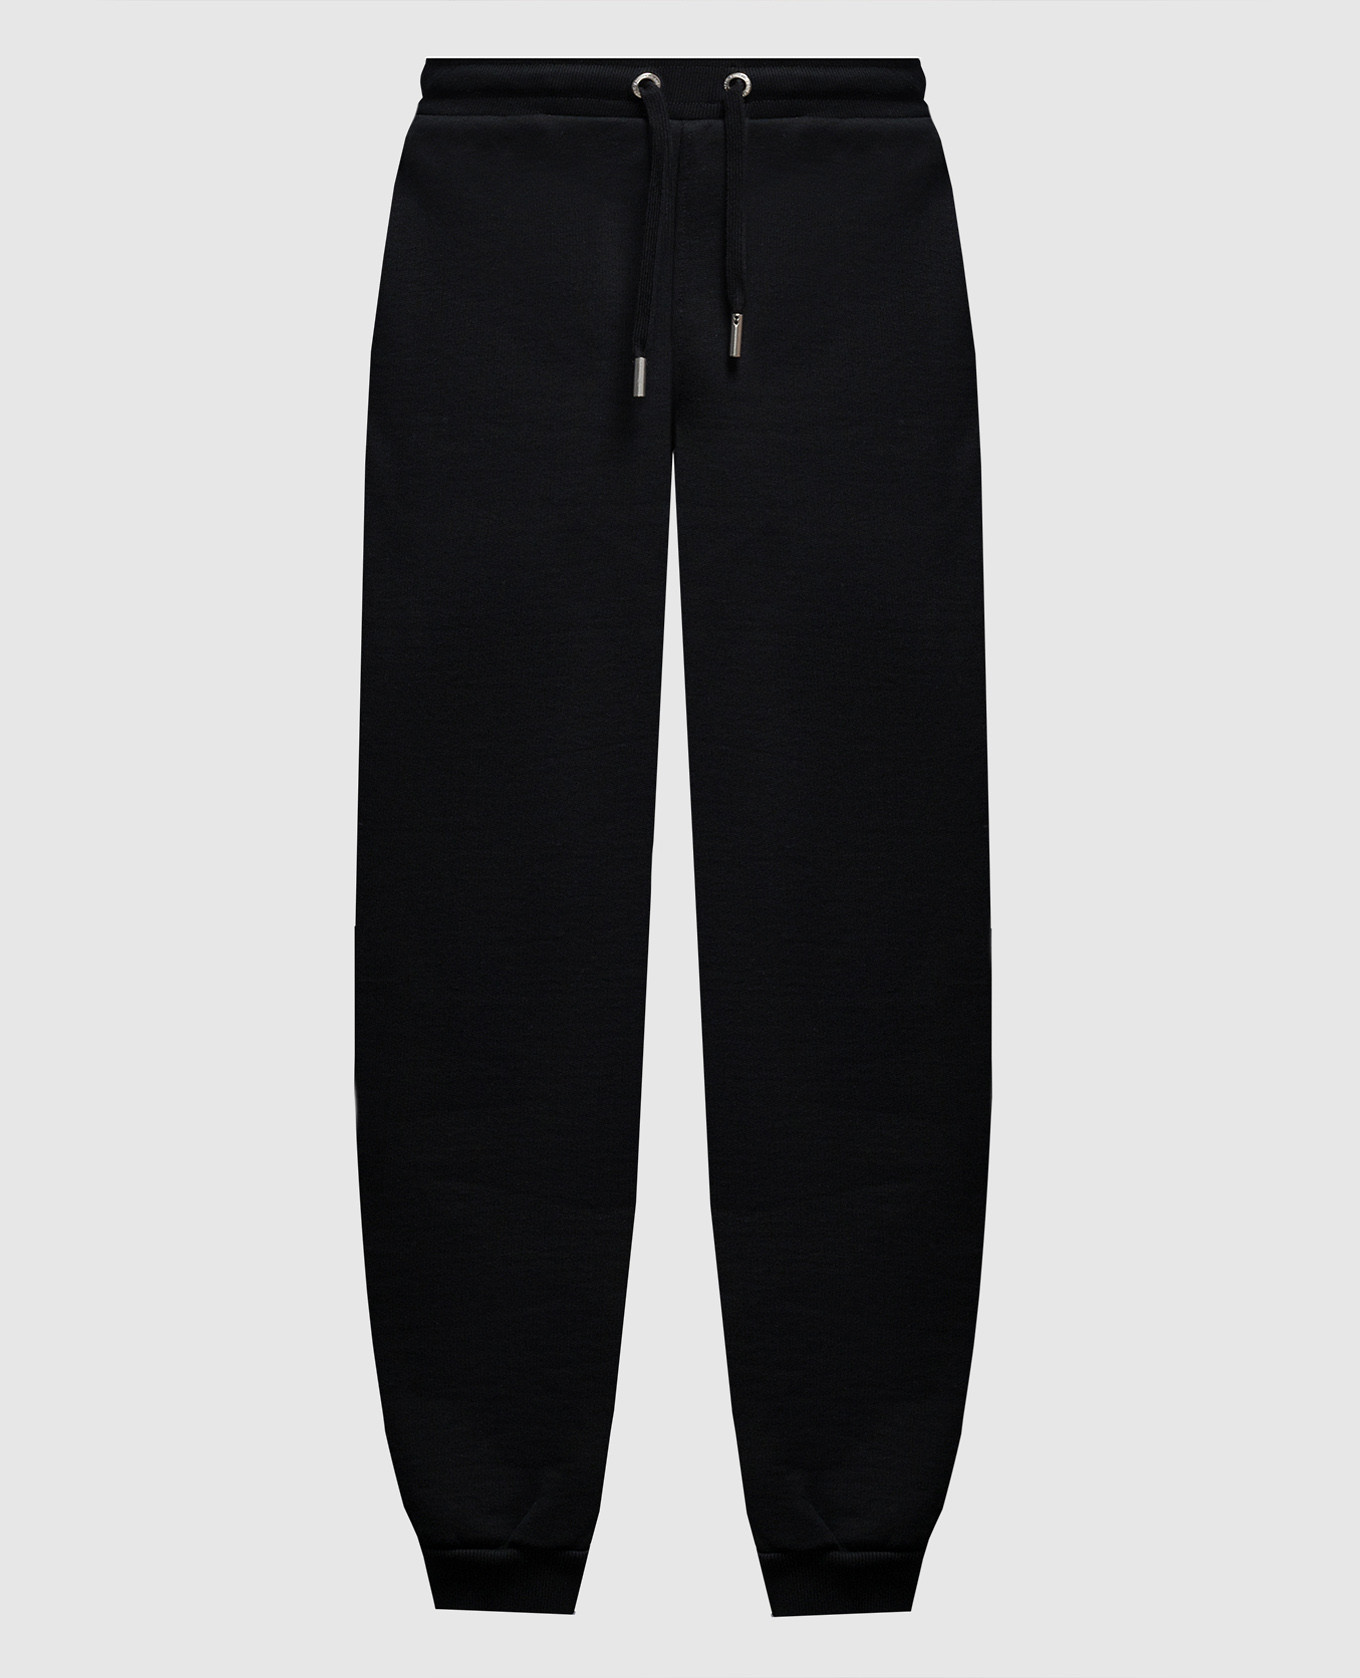 Black joggers with logo embroidery